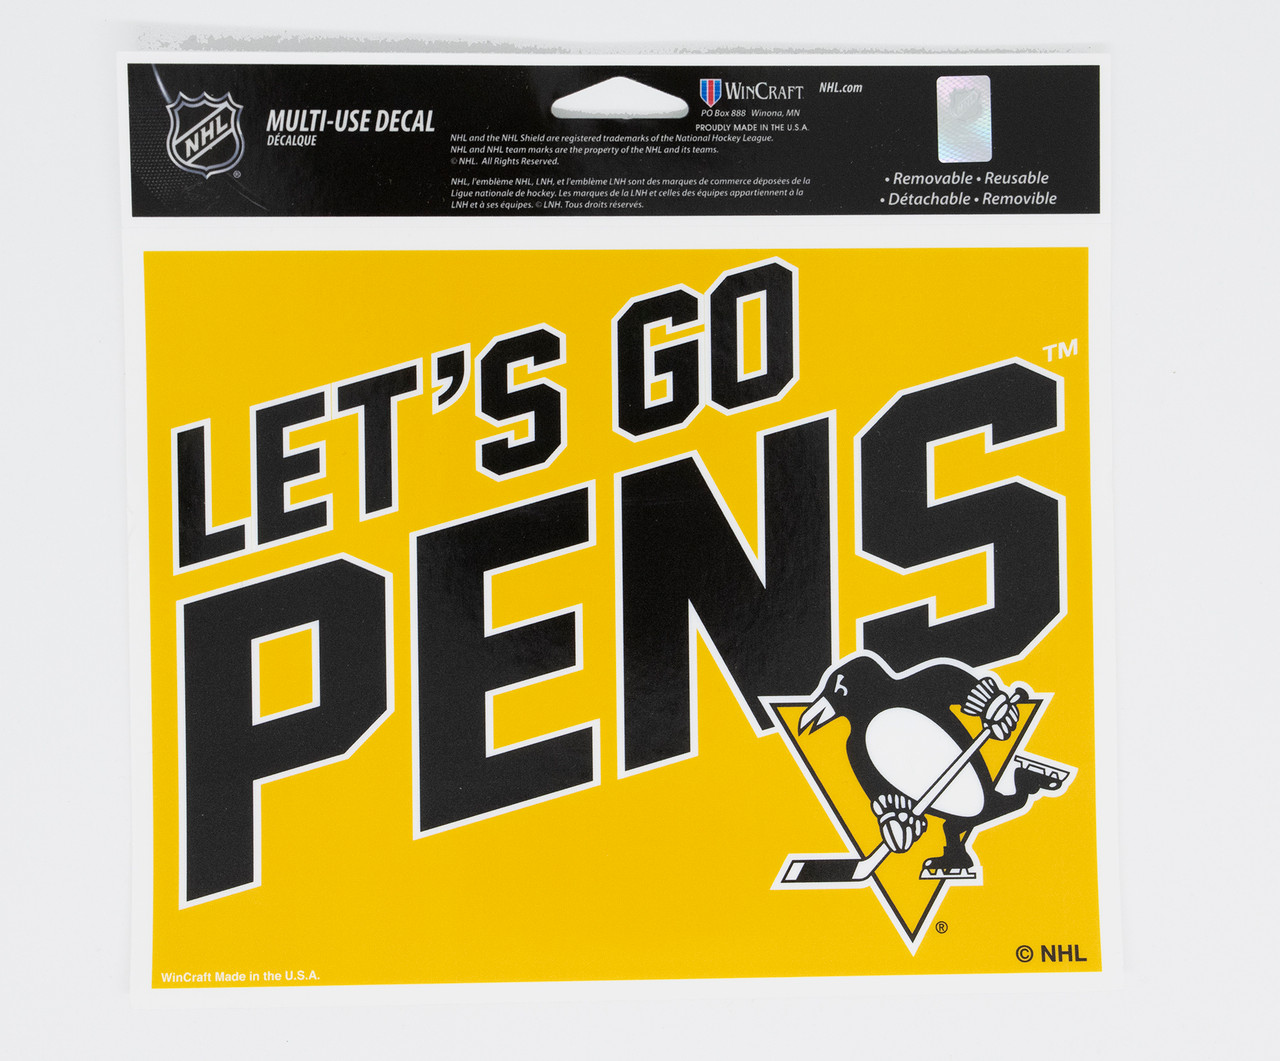 Official Pittsburgh Penguins Let's Go Pens Shirt, hoodie, sweater